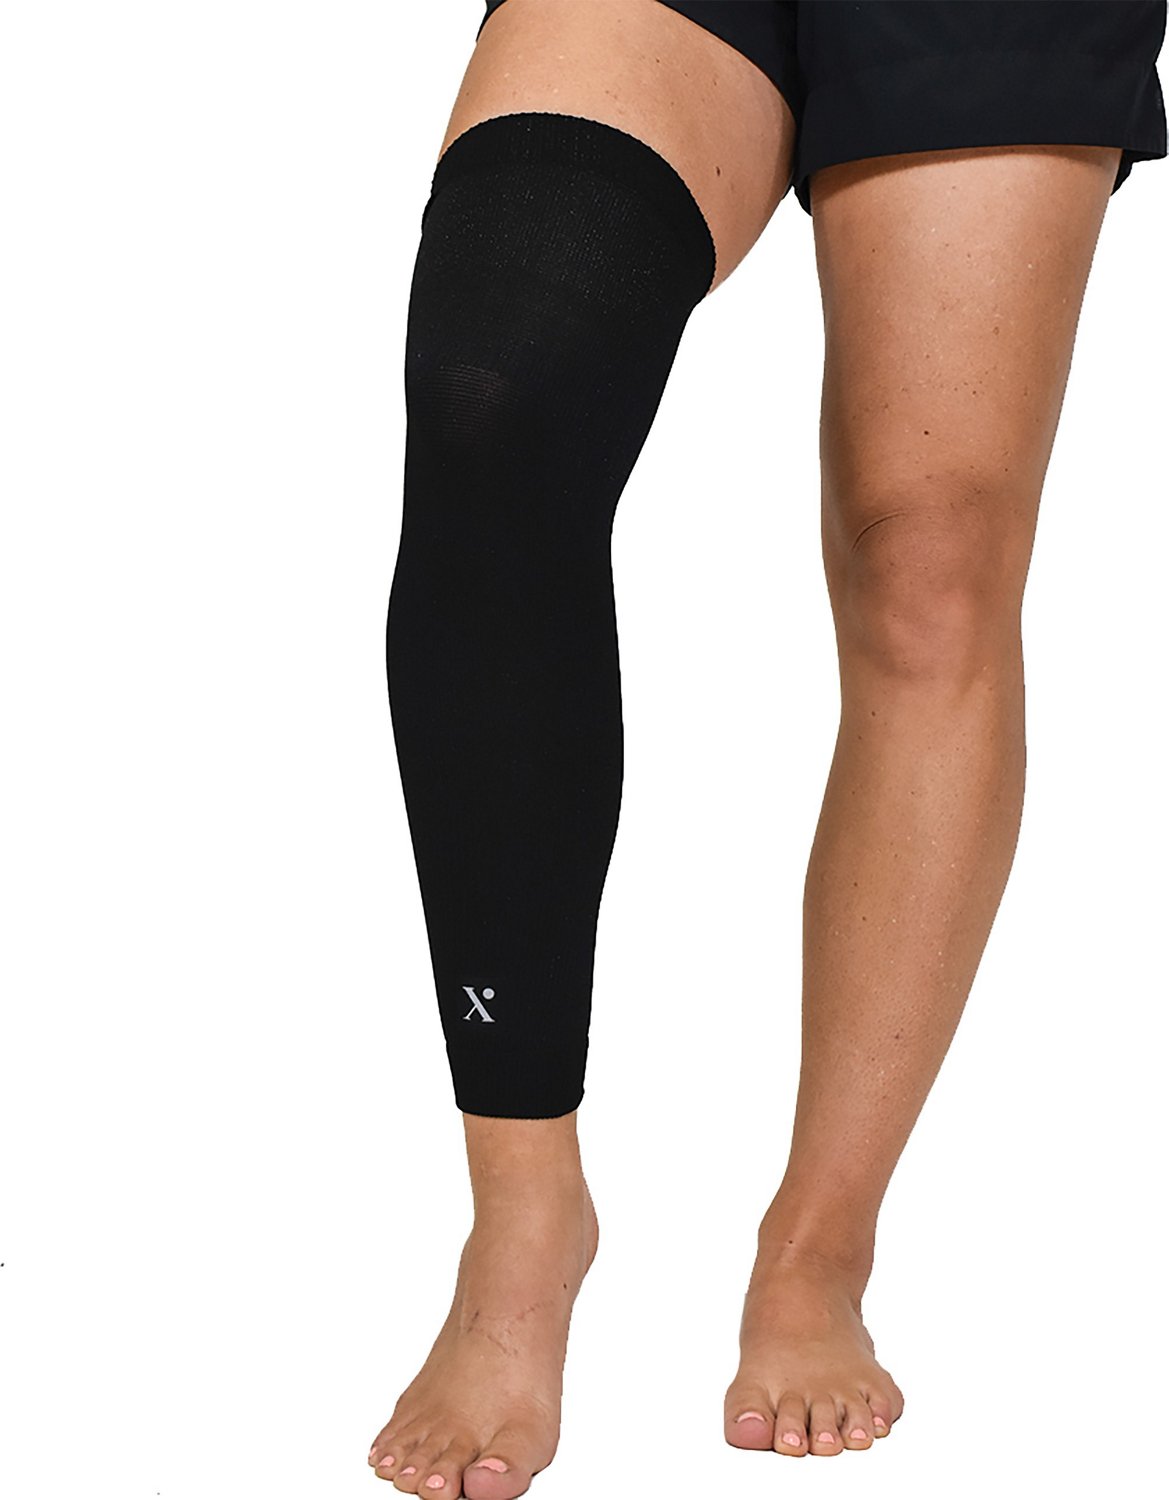 Nufabrx Pain Relieving Medicine and Compression Lower Leg Sleeve